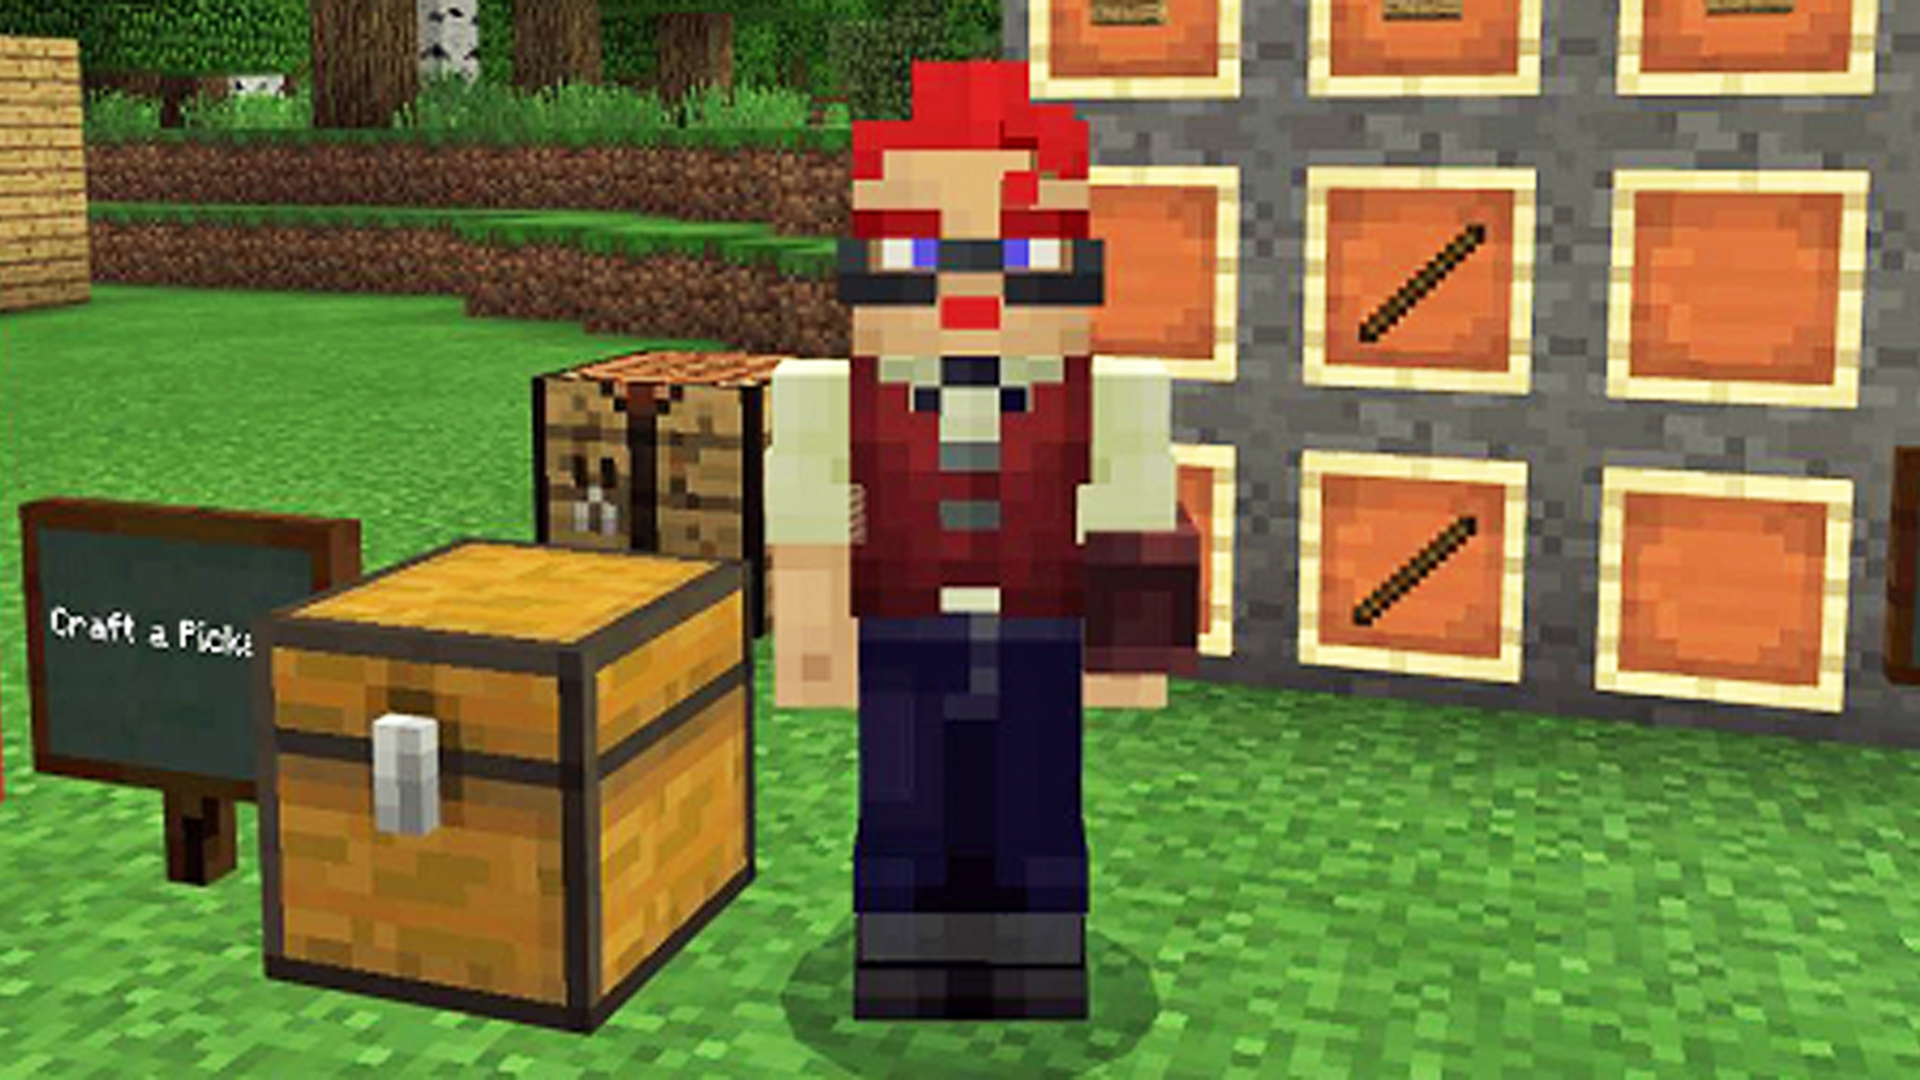 How to get skins in Minecraft Education Edition (2022)